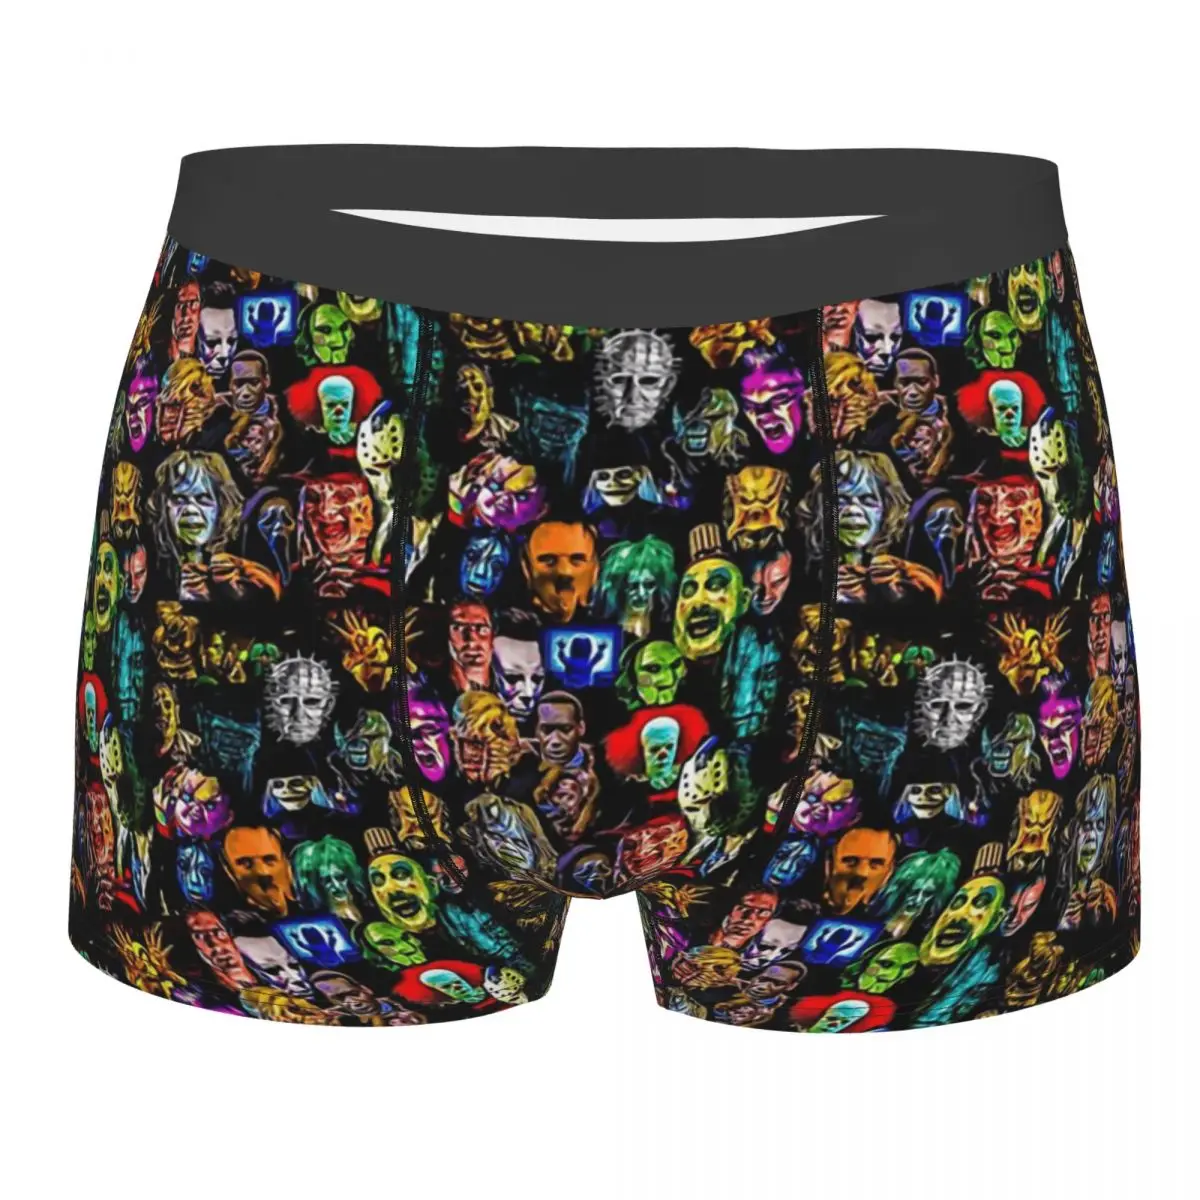 

Horror Film Baddies Legends Man's Boxer Briefs Highly Breathable Underpants High Quality Print Shorts Gift Idea